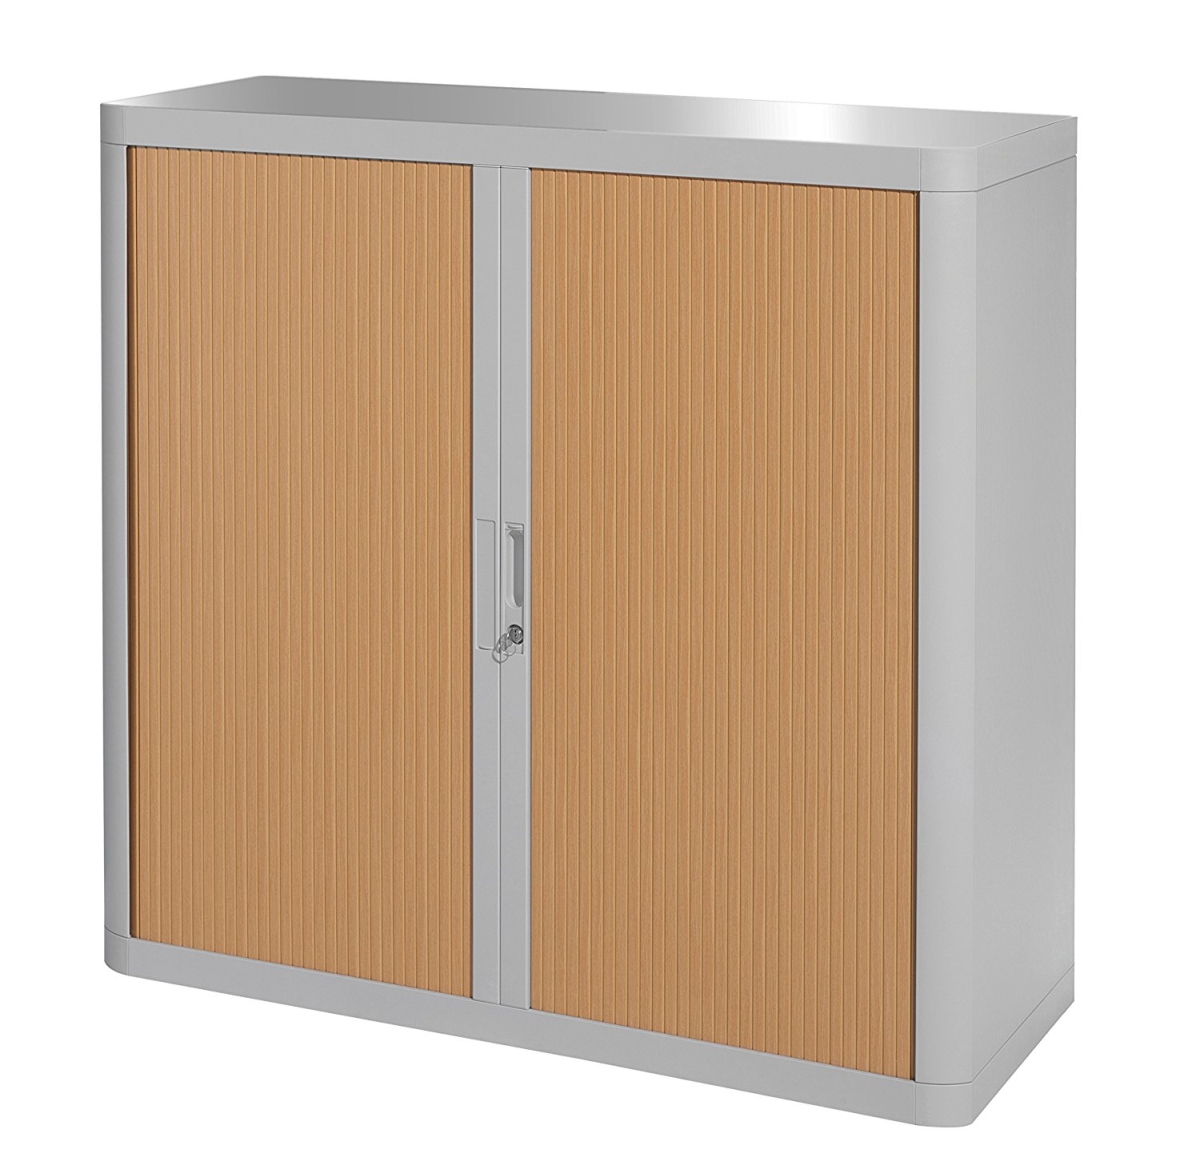 E1ct0009300044 41 In. Easyoffice Storage Cabinet, Grey & Beech